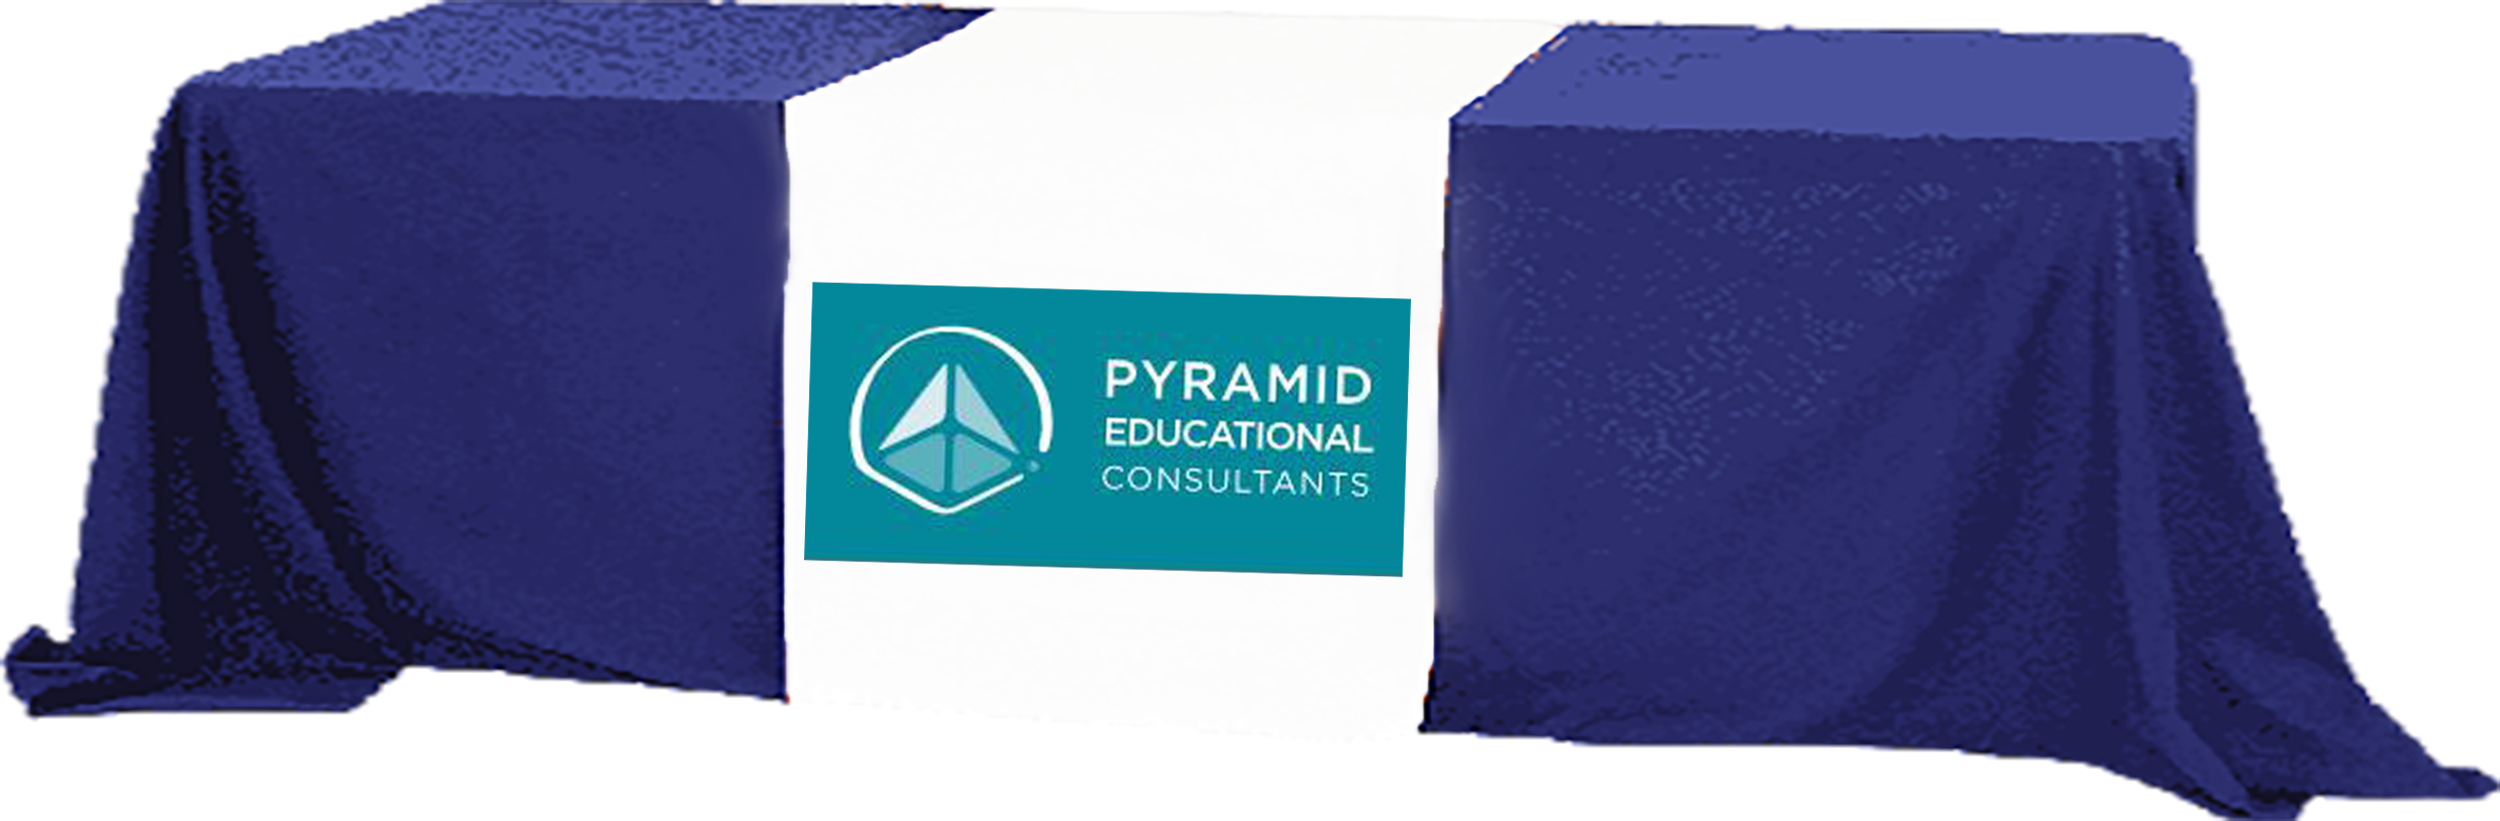 Pyramid logo on a table cover over a table image